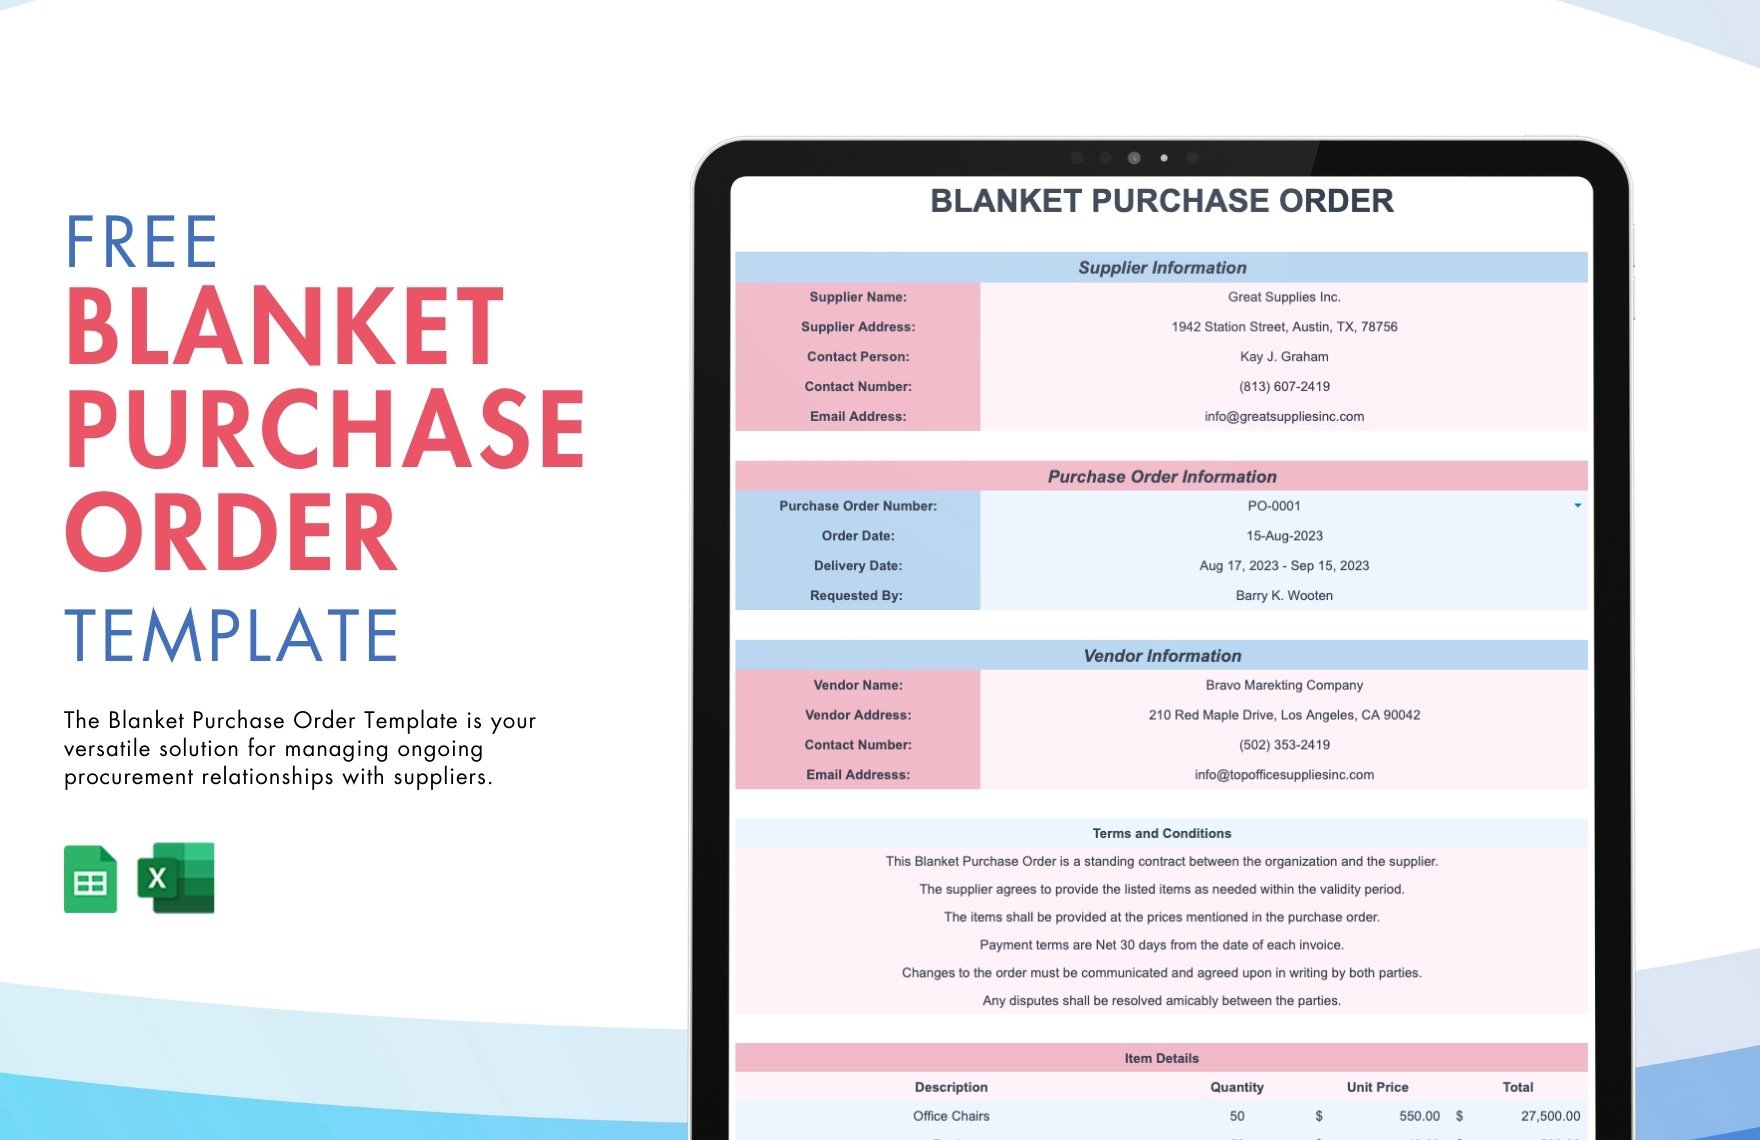 Free Blanket Purchase Order Template